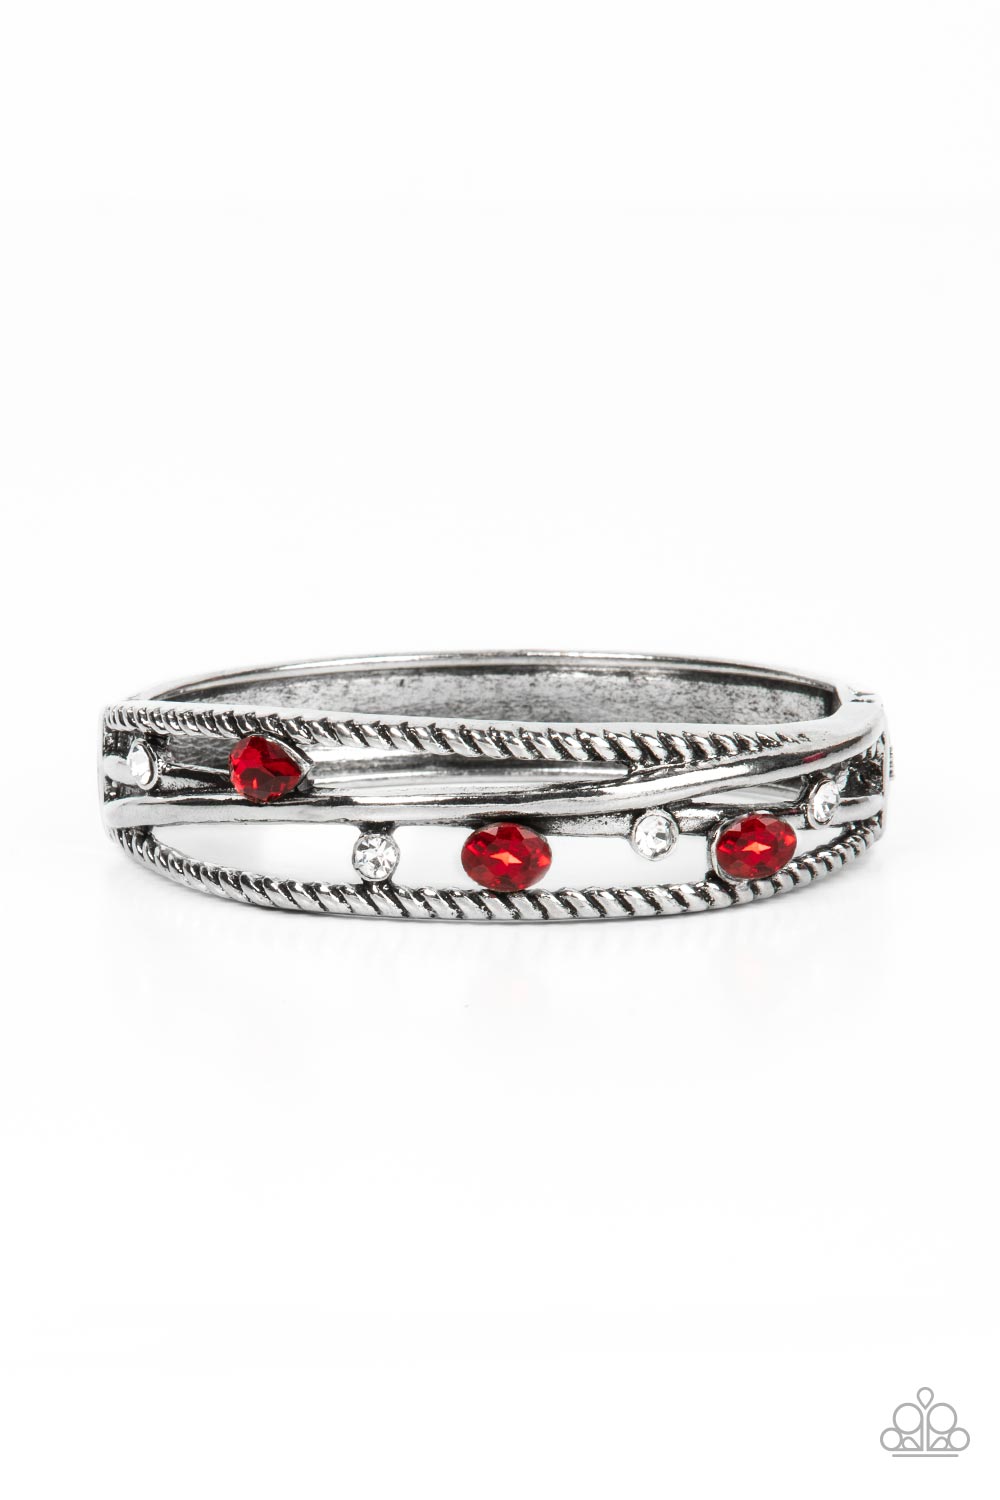 Bonus Bling - Red and Silver Bracelet - Paparazzi Accessories - Bordered in rustic silver bars, a sparkly collection of glassy white and teardrop and oval red rhinestones are sporadically sprinkled across the silvery crisscrossed layers of a bangle-like bracelet, resulting in a versatile sparkle around the wrist. Features a hinged closure.